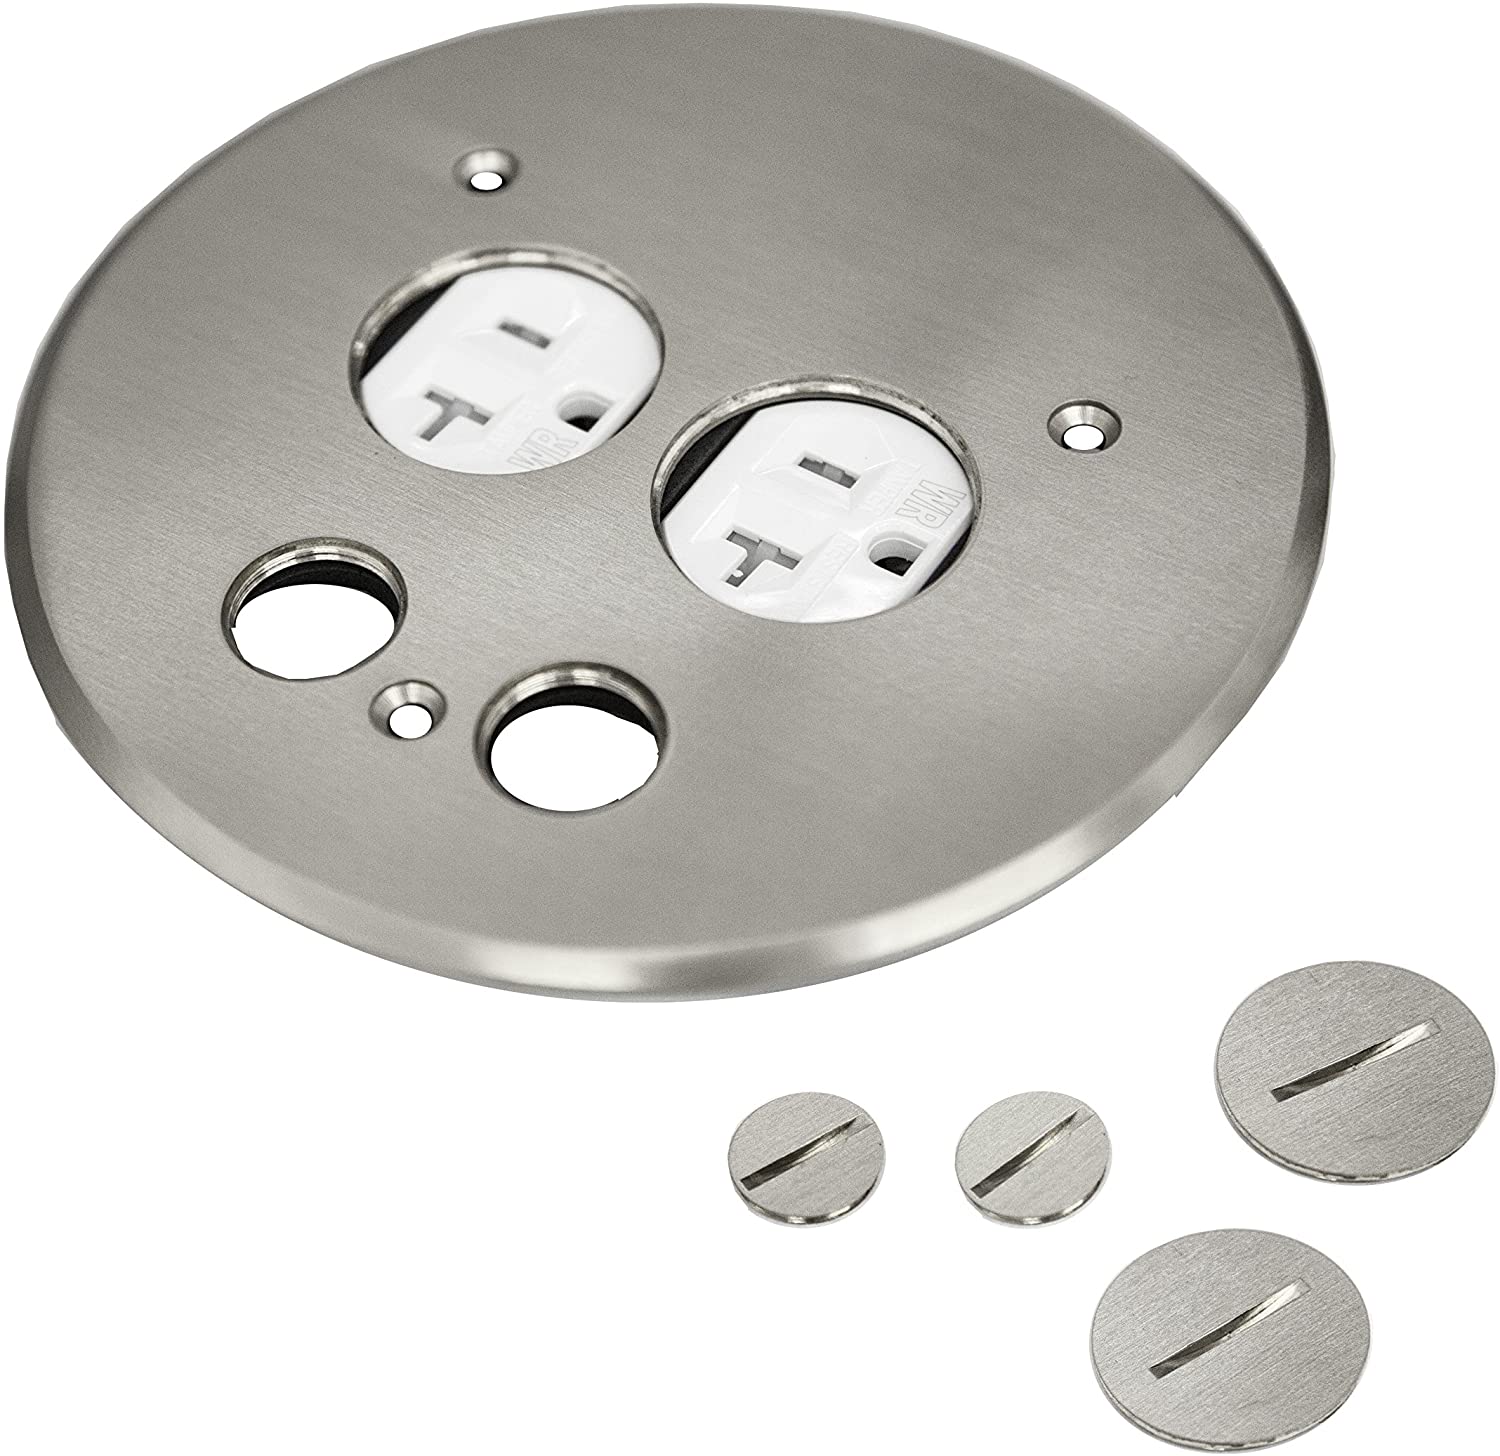 1-Gang 5.50" Round Coin Open Floor Box Cover, 20A TR Receptacle and Data Ports